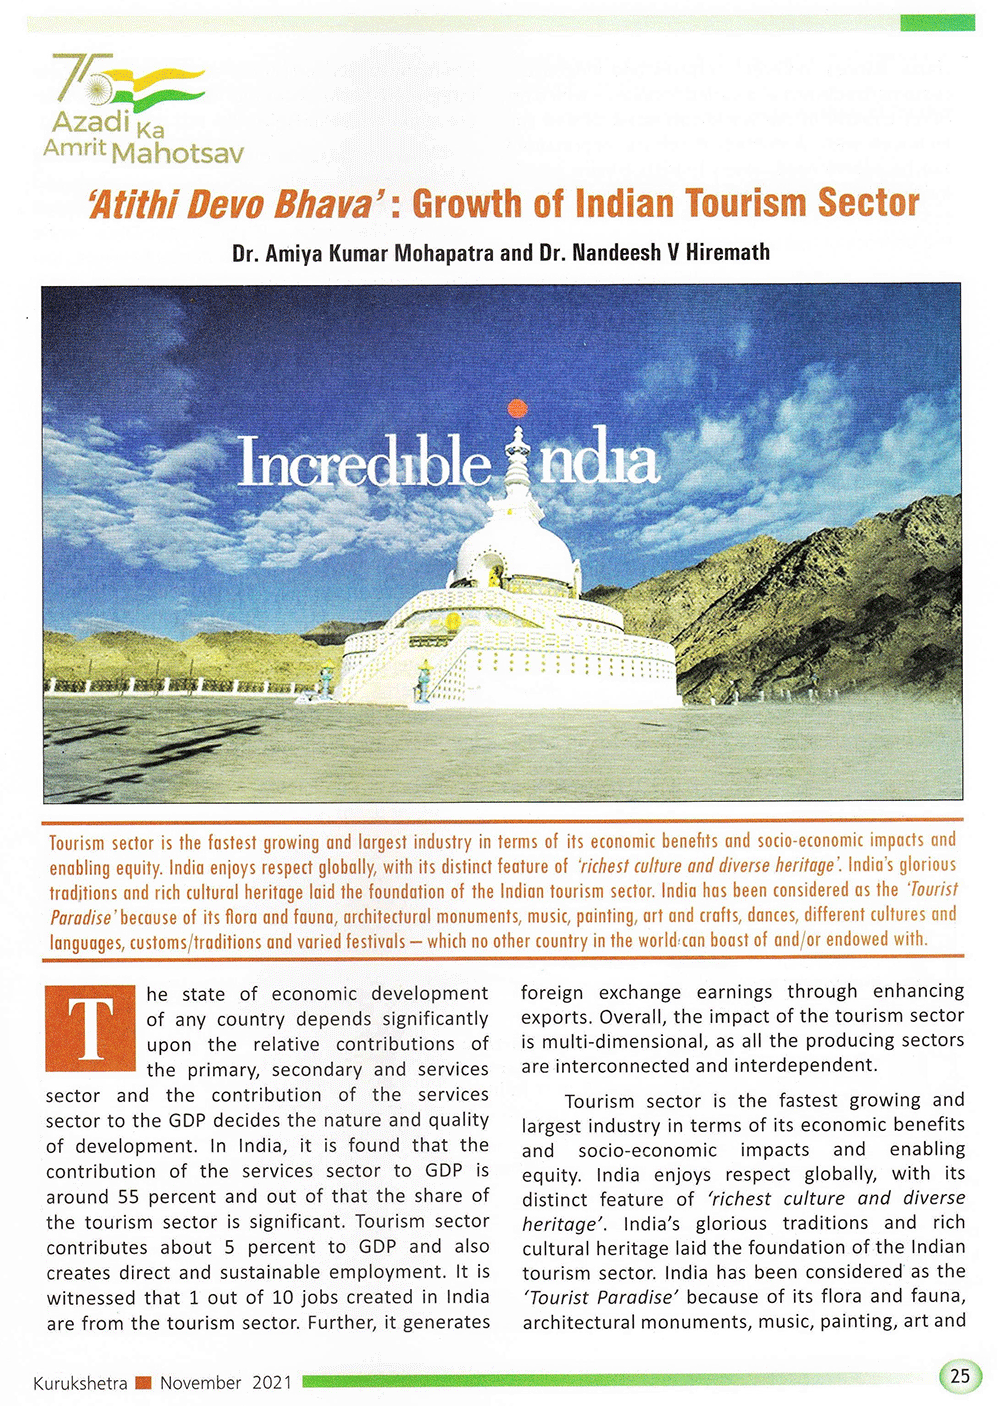 Growth of Indian Tourism Sector